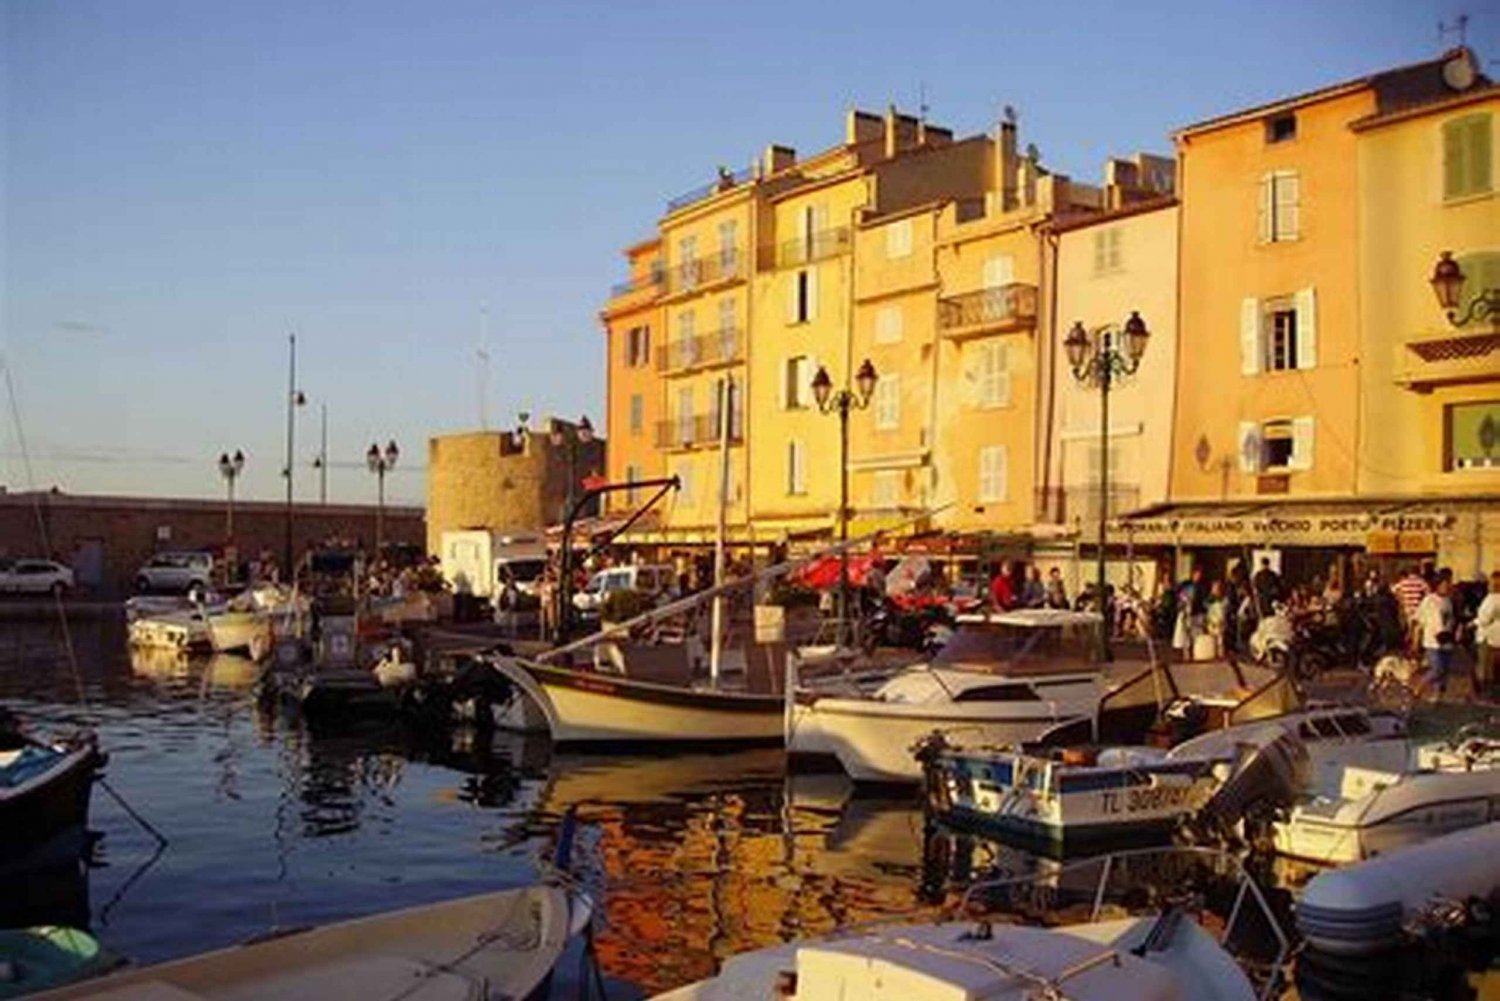 From Nice: Saint-Tropez and Port Grimaud Day Tour